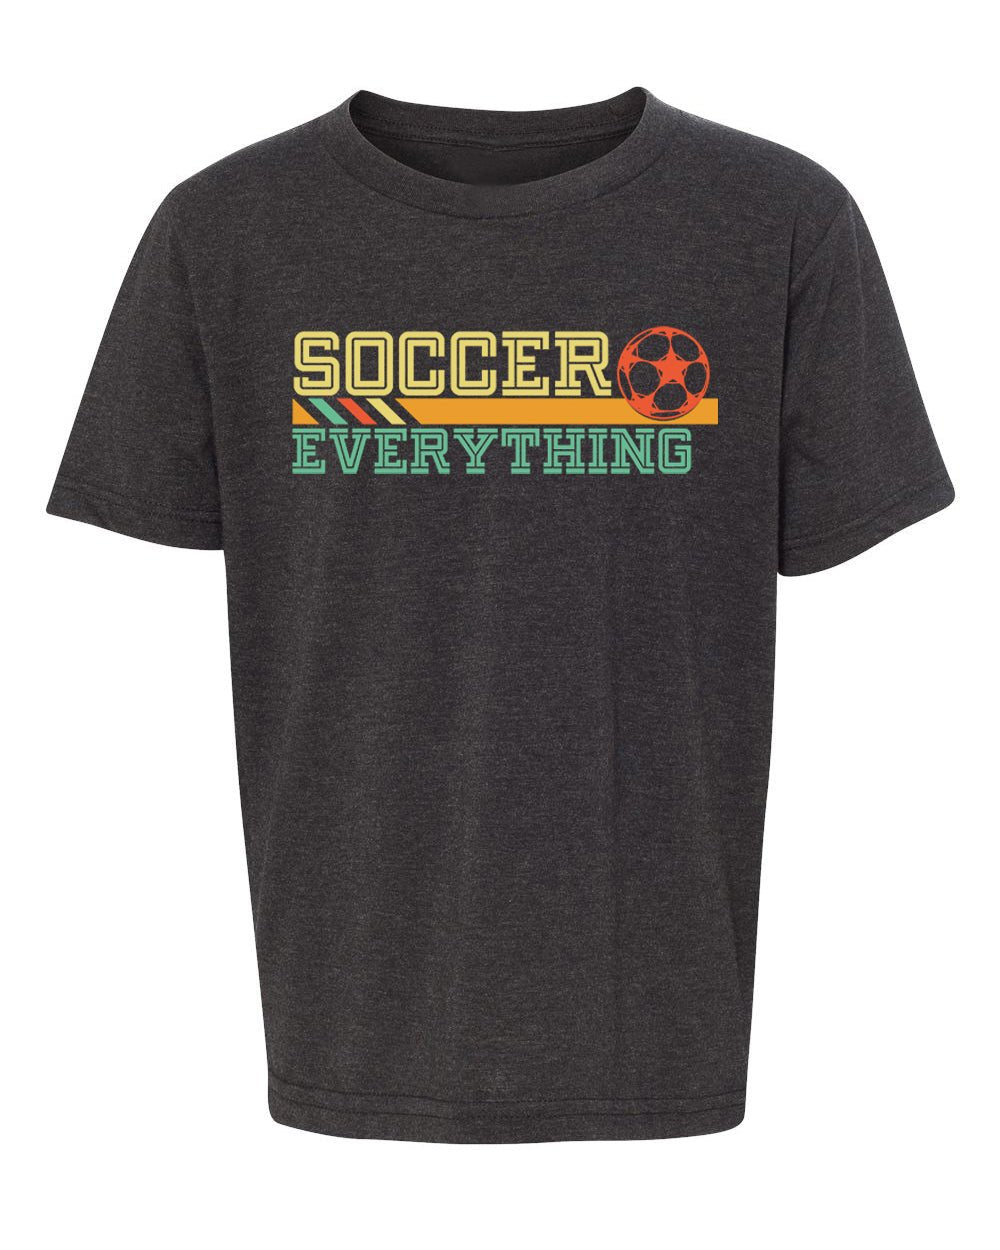 Soccer Over Everything Kids T Shirts - Mato & Hash